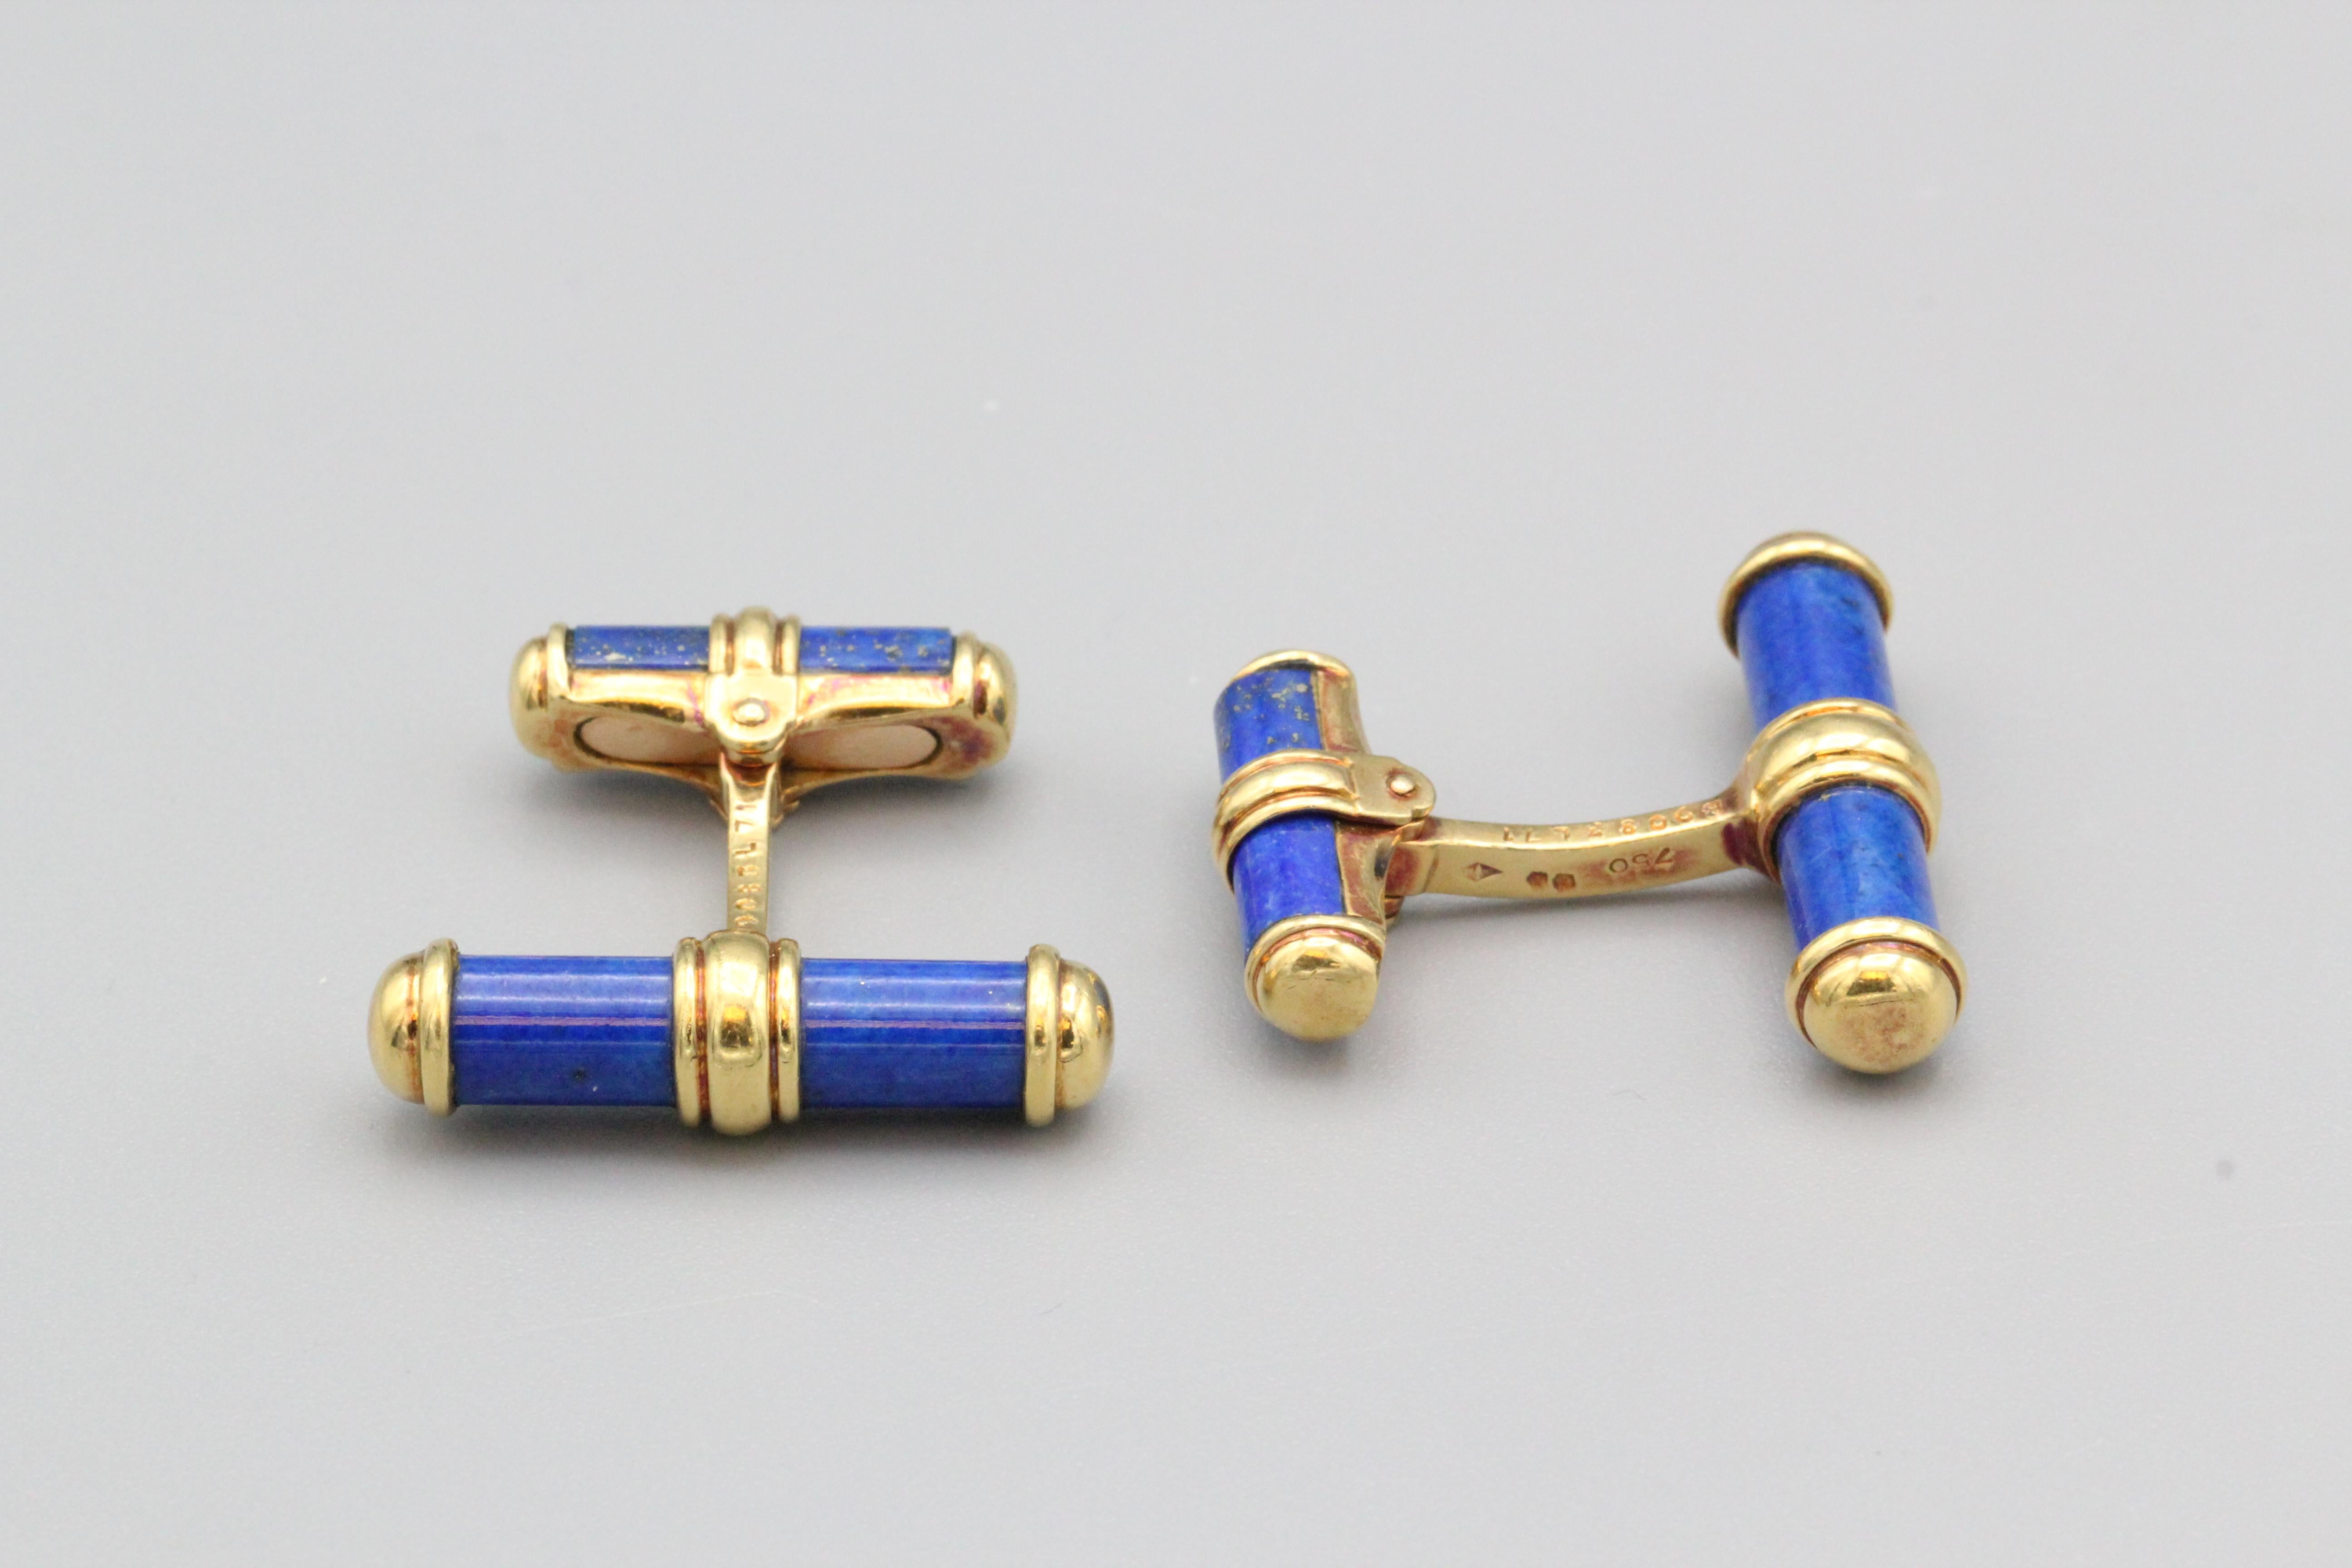 Fine pair of 18K yellow gold and lapis lazuli bar cufflinks by Van Cleef & Arpels.  These cufflinks feature a bar design with lapis inserts; on the opposite side is an easy to use folding bar also set with lapis inserts.  Of very fine quality and